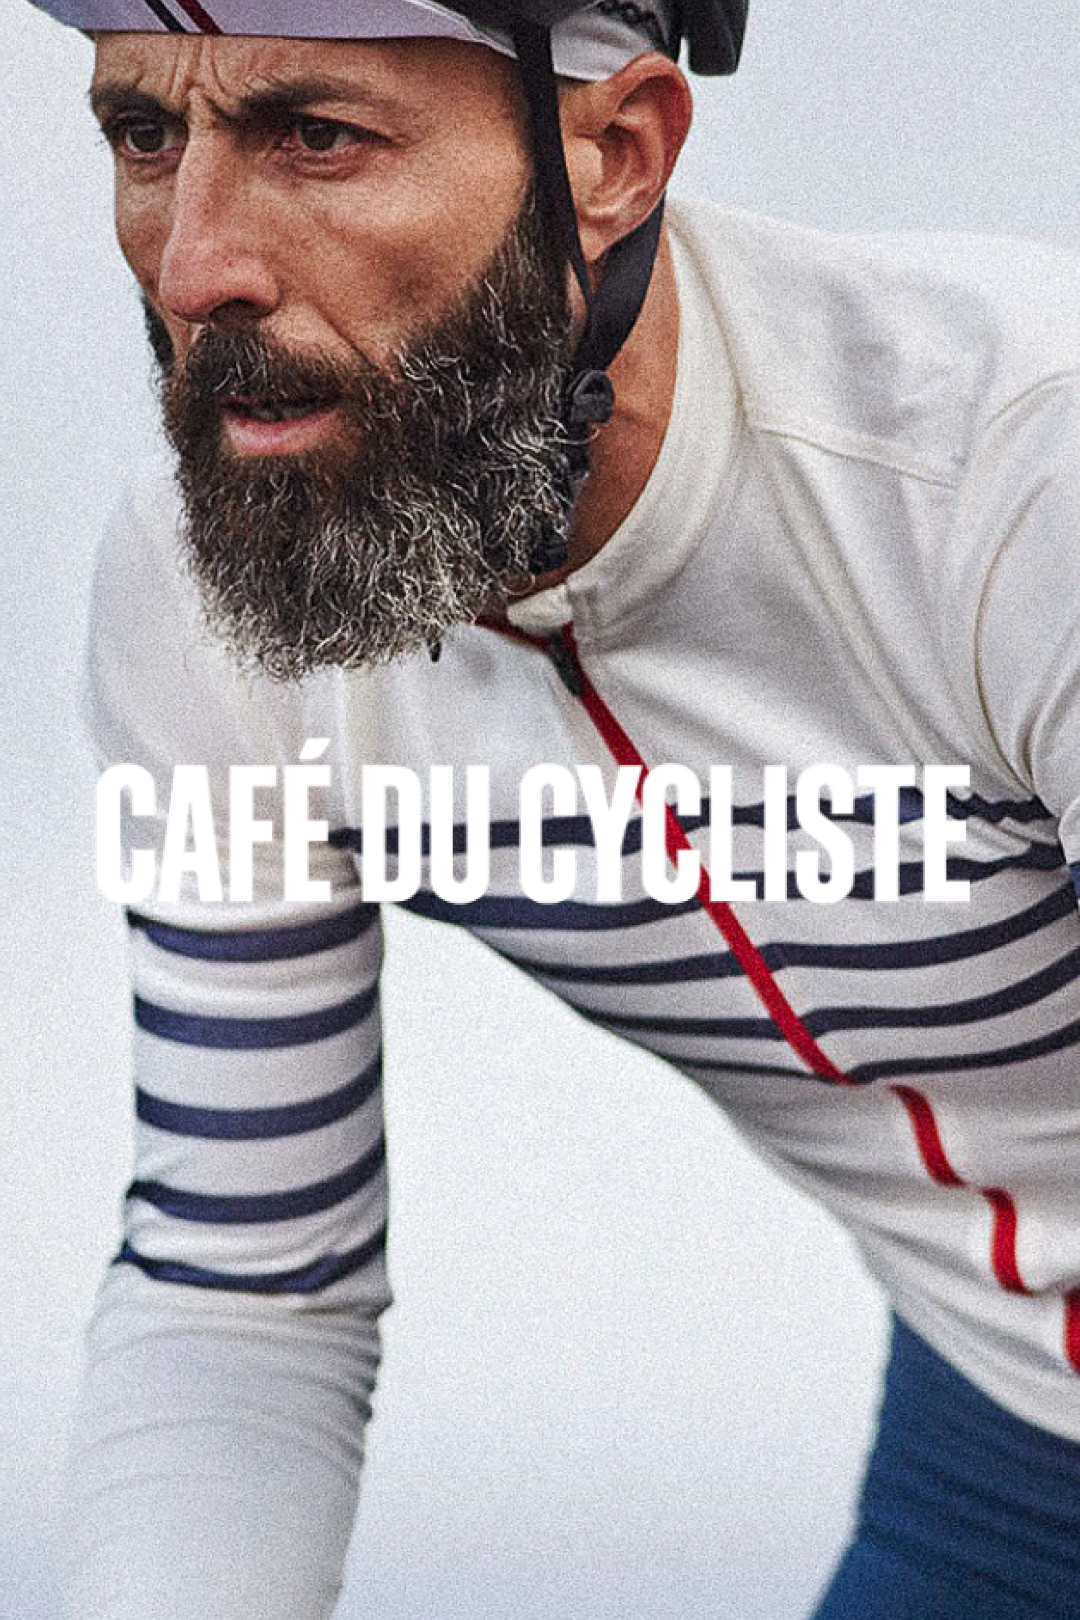 Focused cyclist in a Café du Cycliste striped jersey looking intently forward @ Bici.